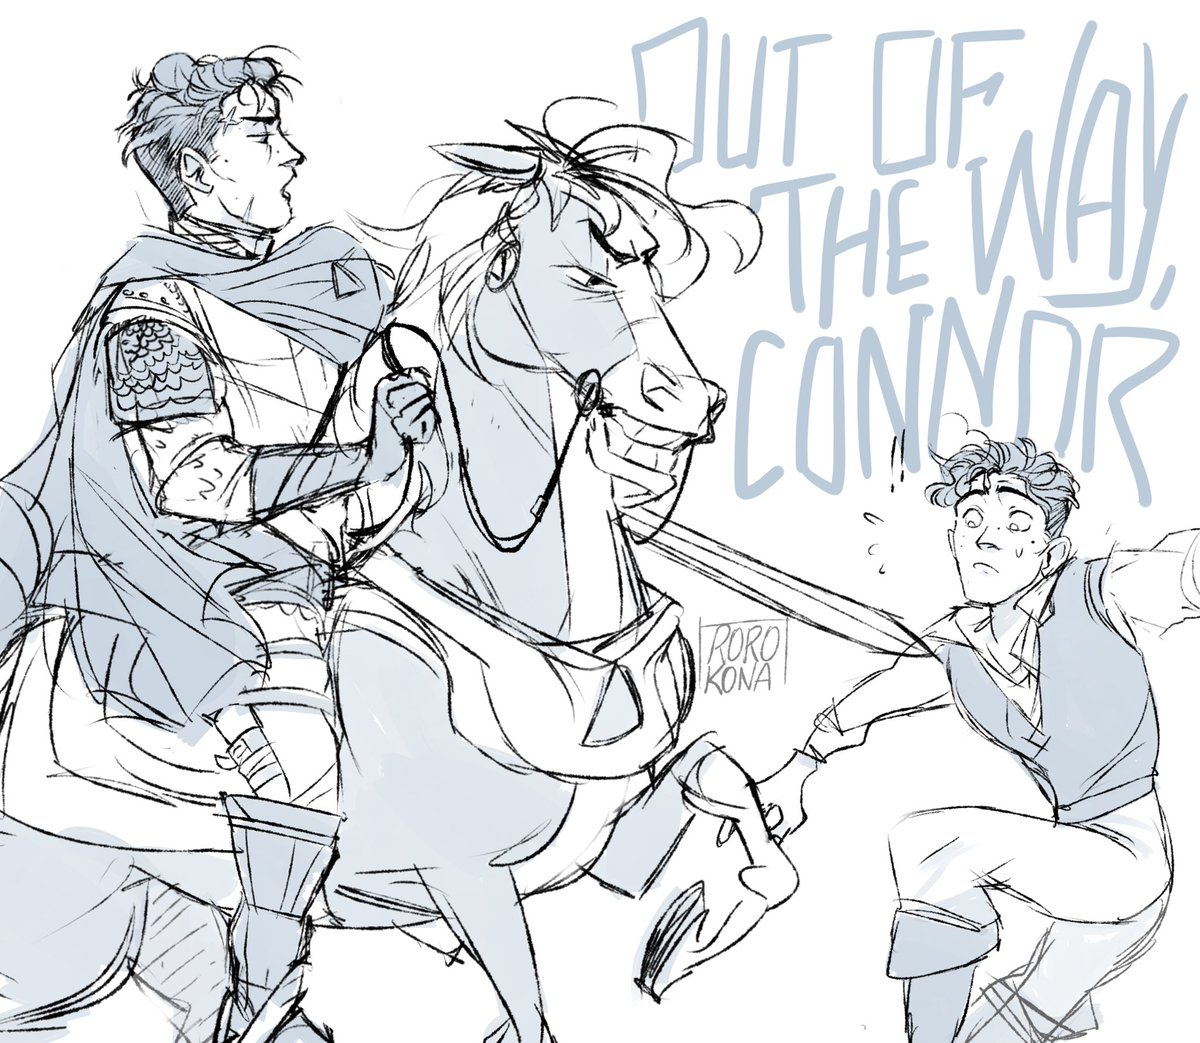 i had an old knights DBH AU (i called it Knights of the Black Death, haha)... where hank is the villain & connor&nines are knights #DetroitBecomeHuman 